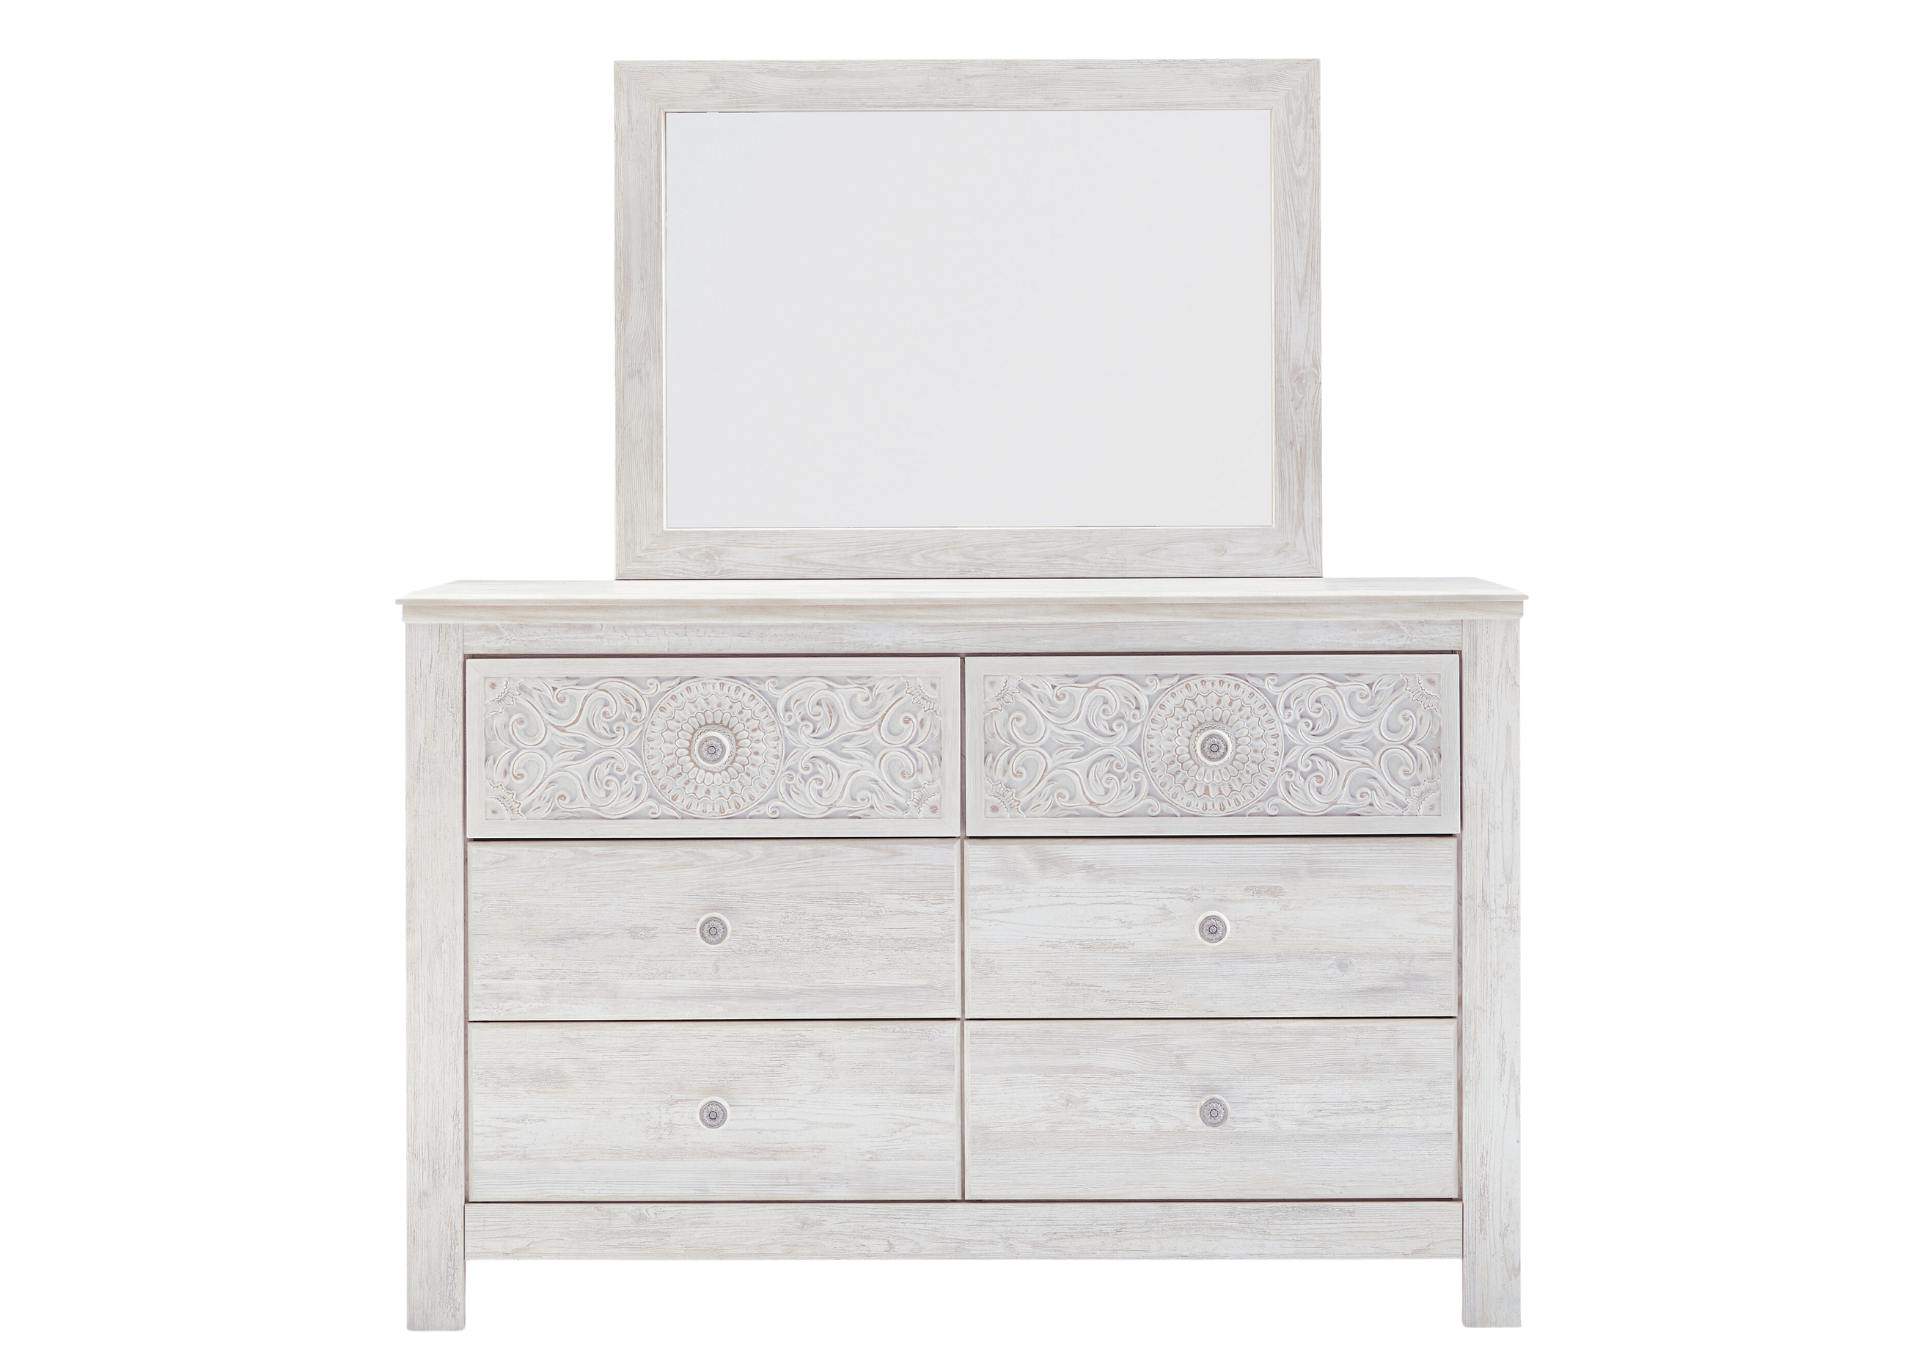 PAXBERRY DRESSER AND MIRROR